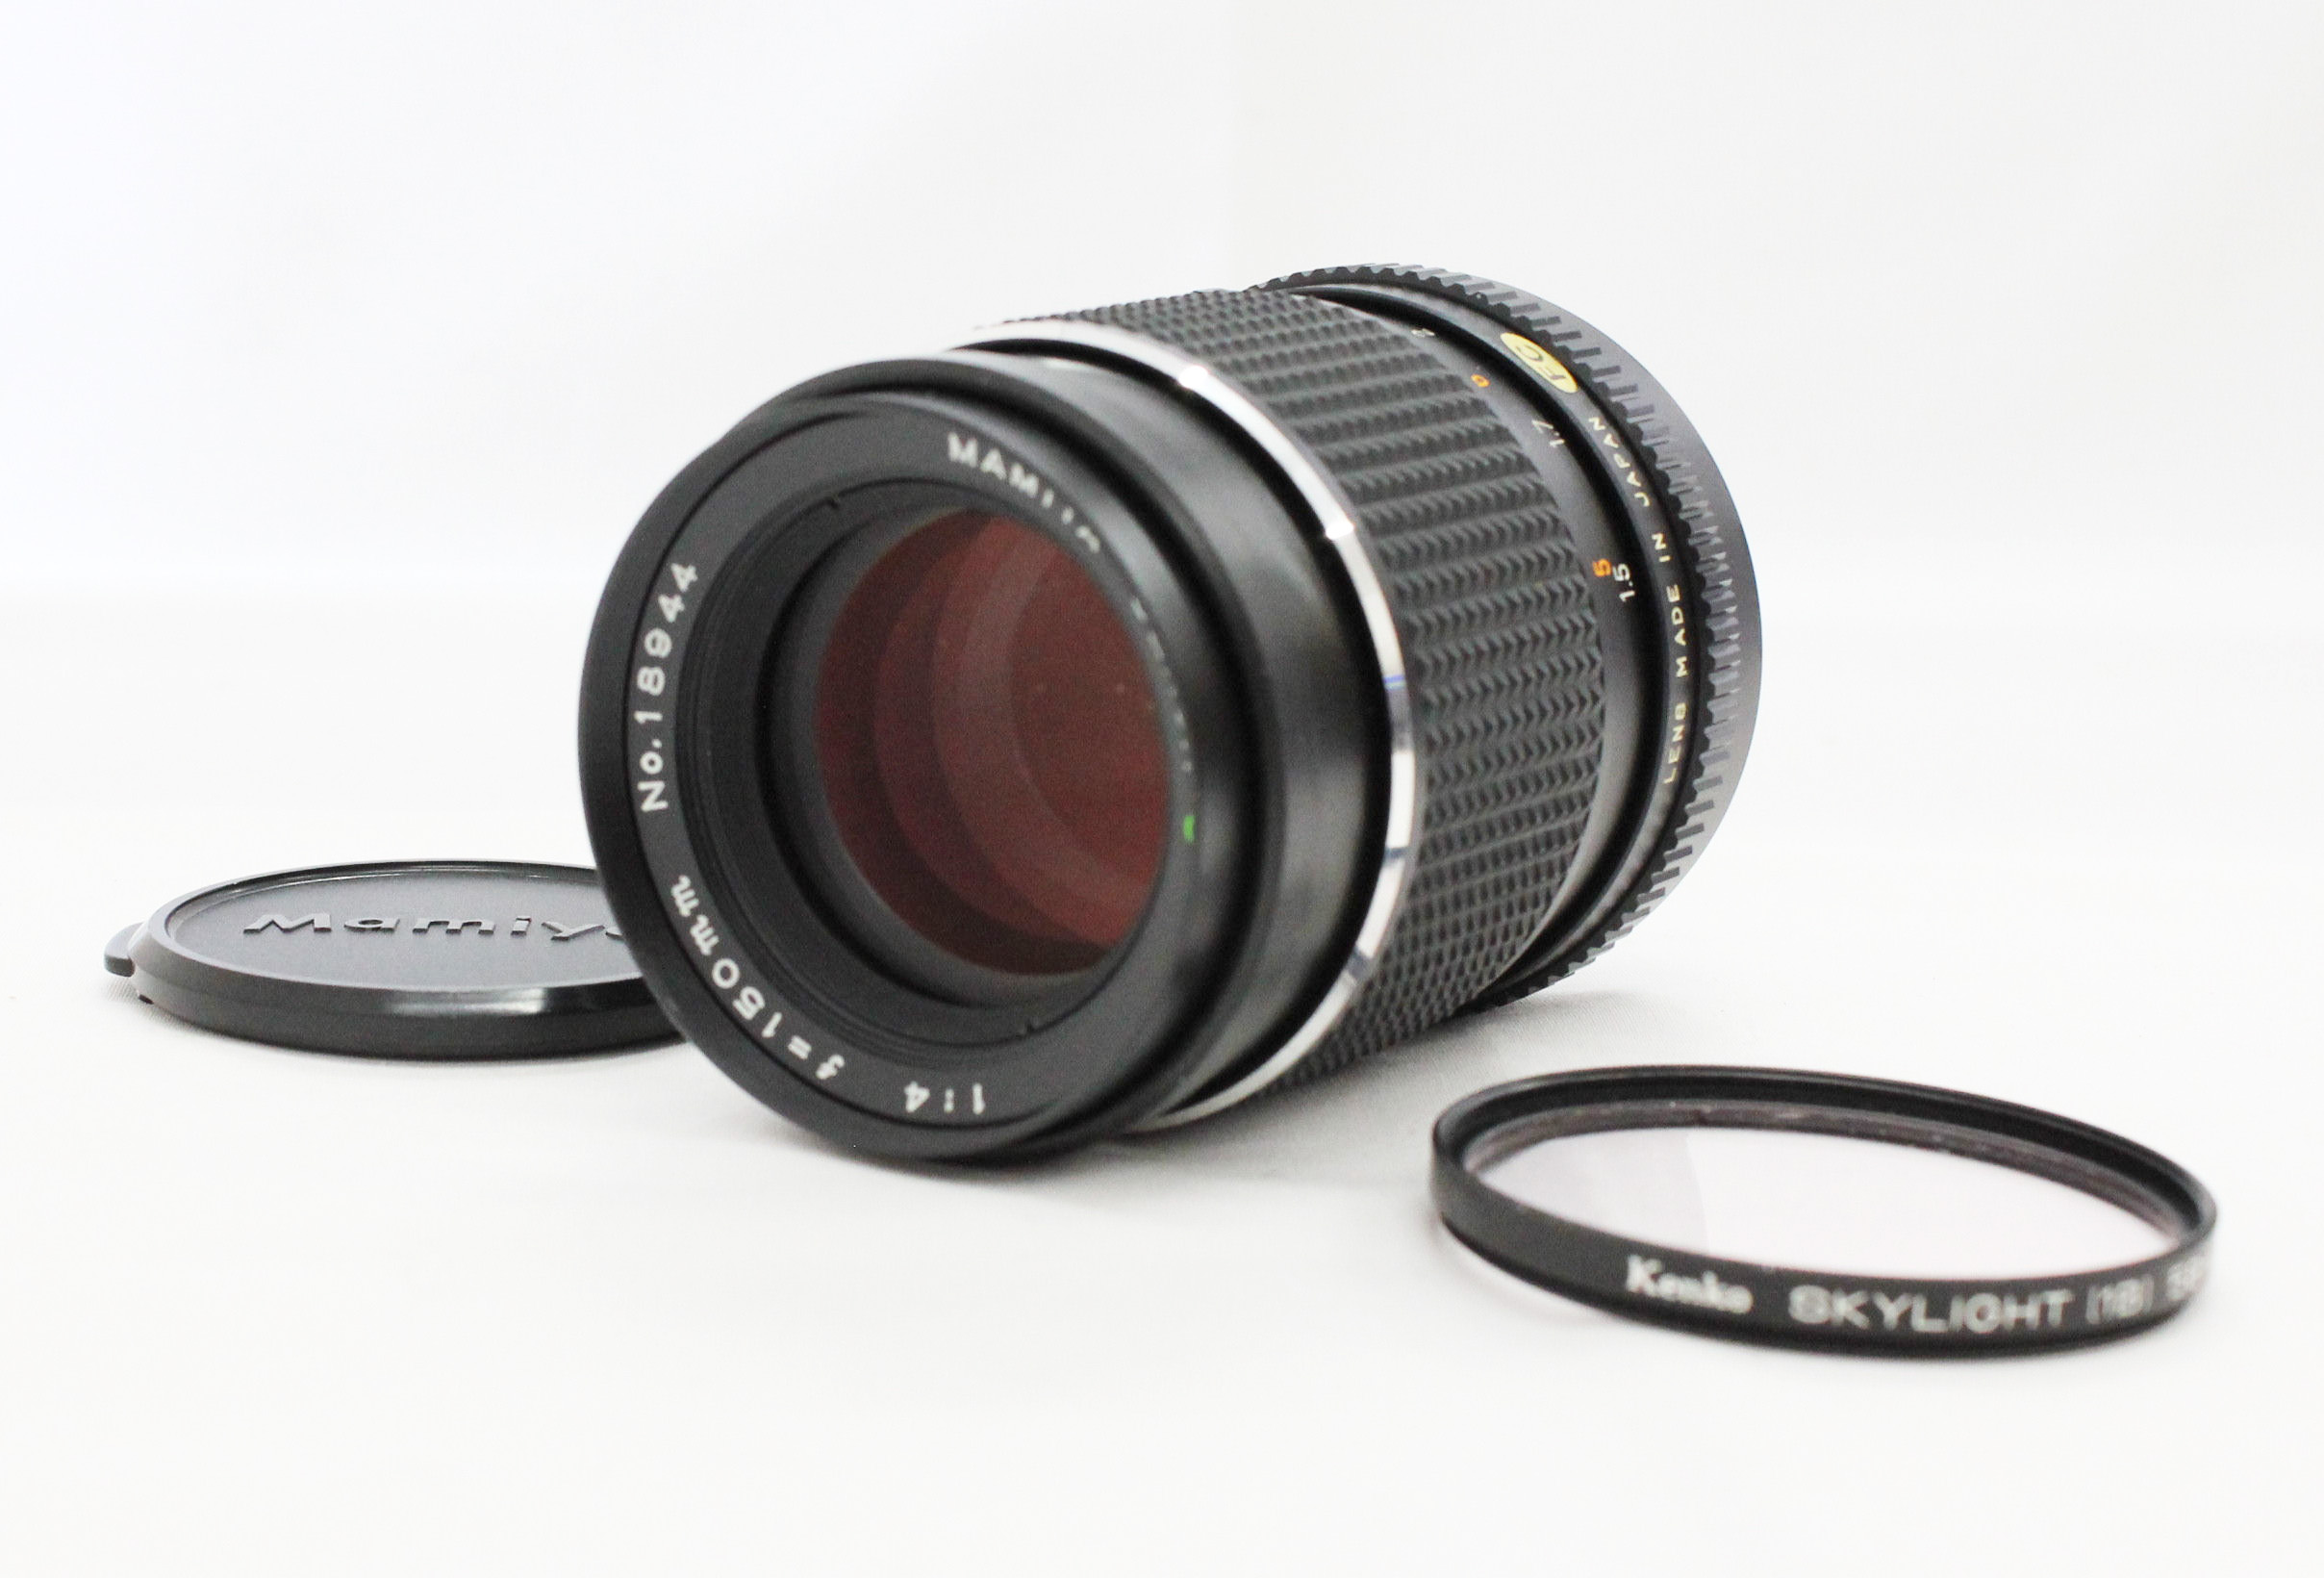 Mamiya-Sekor Macro C 80mm F/4 Lens for M645/Pro/TL/1000s from Japan